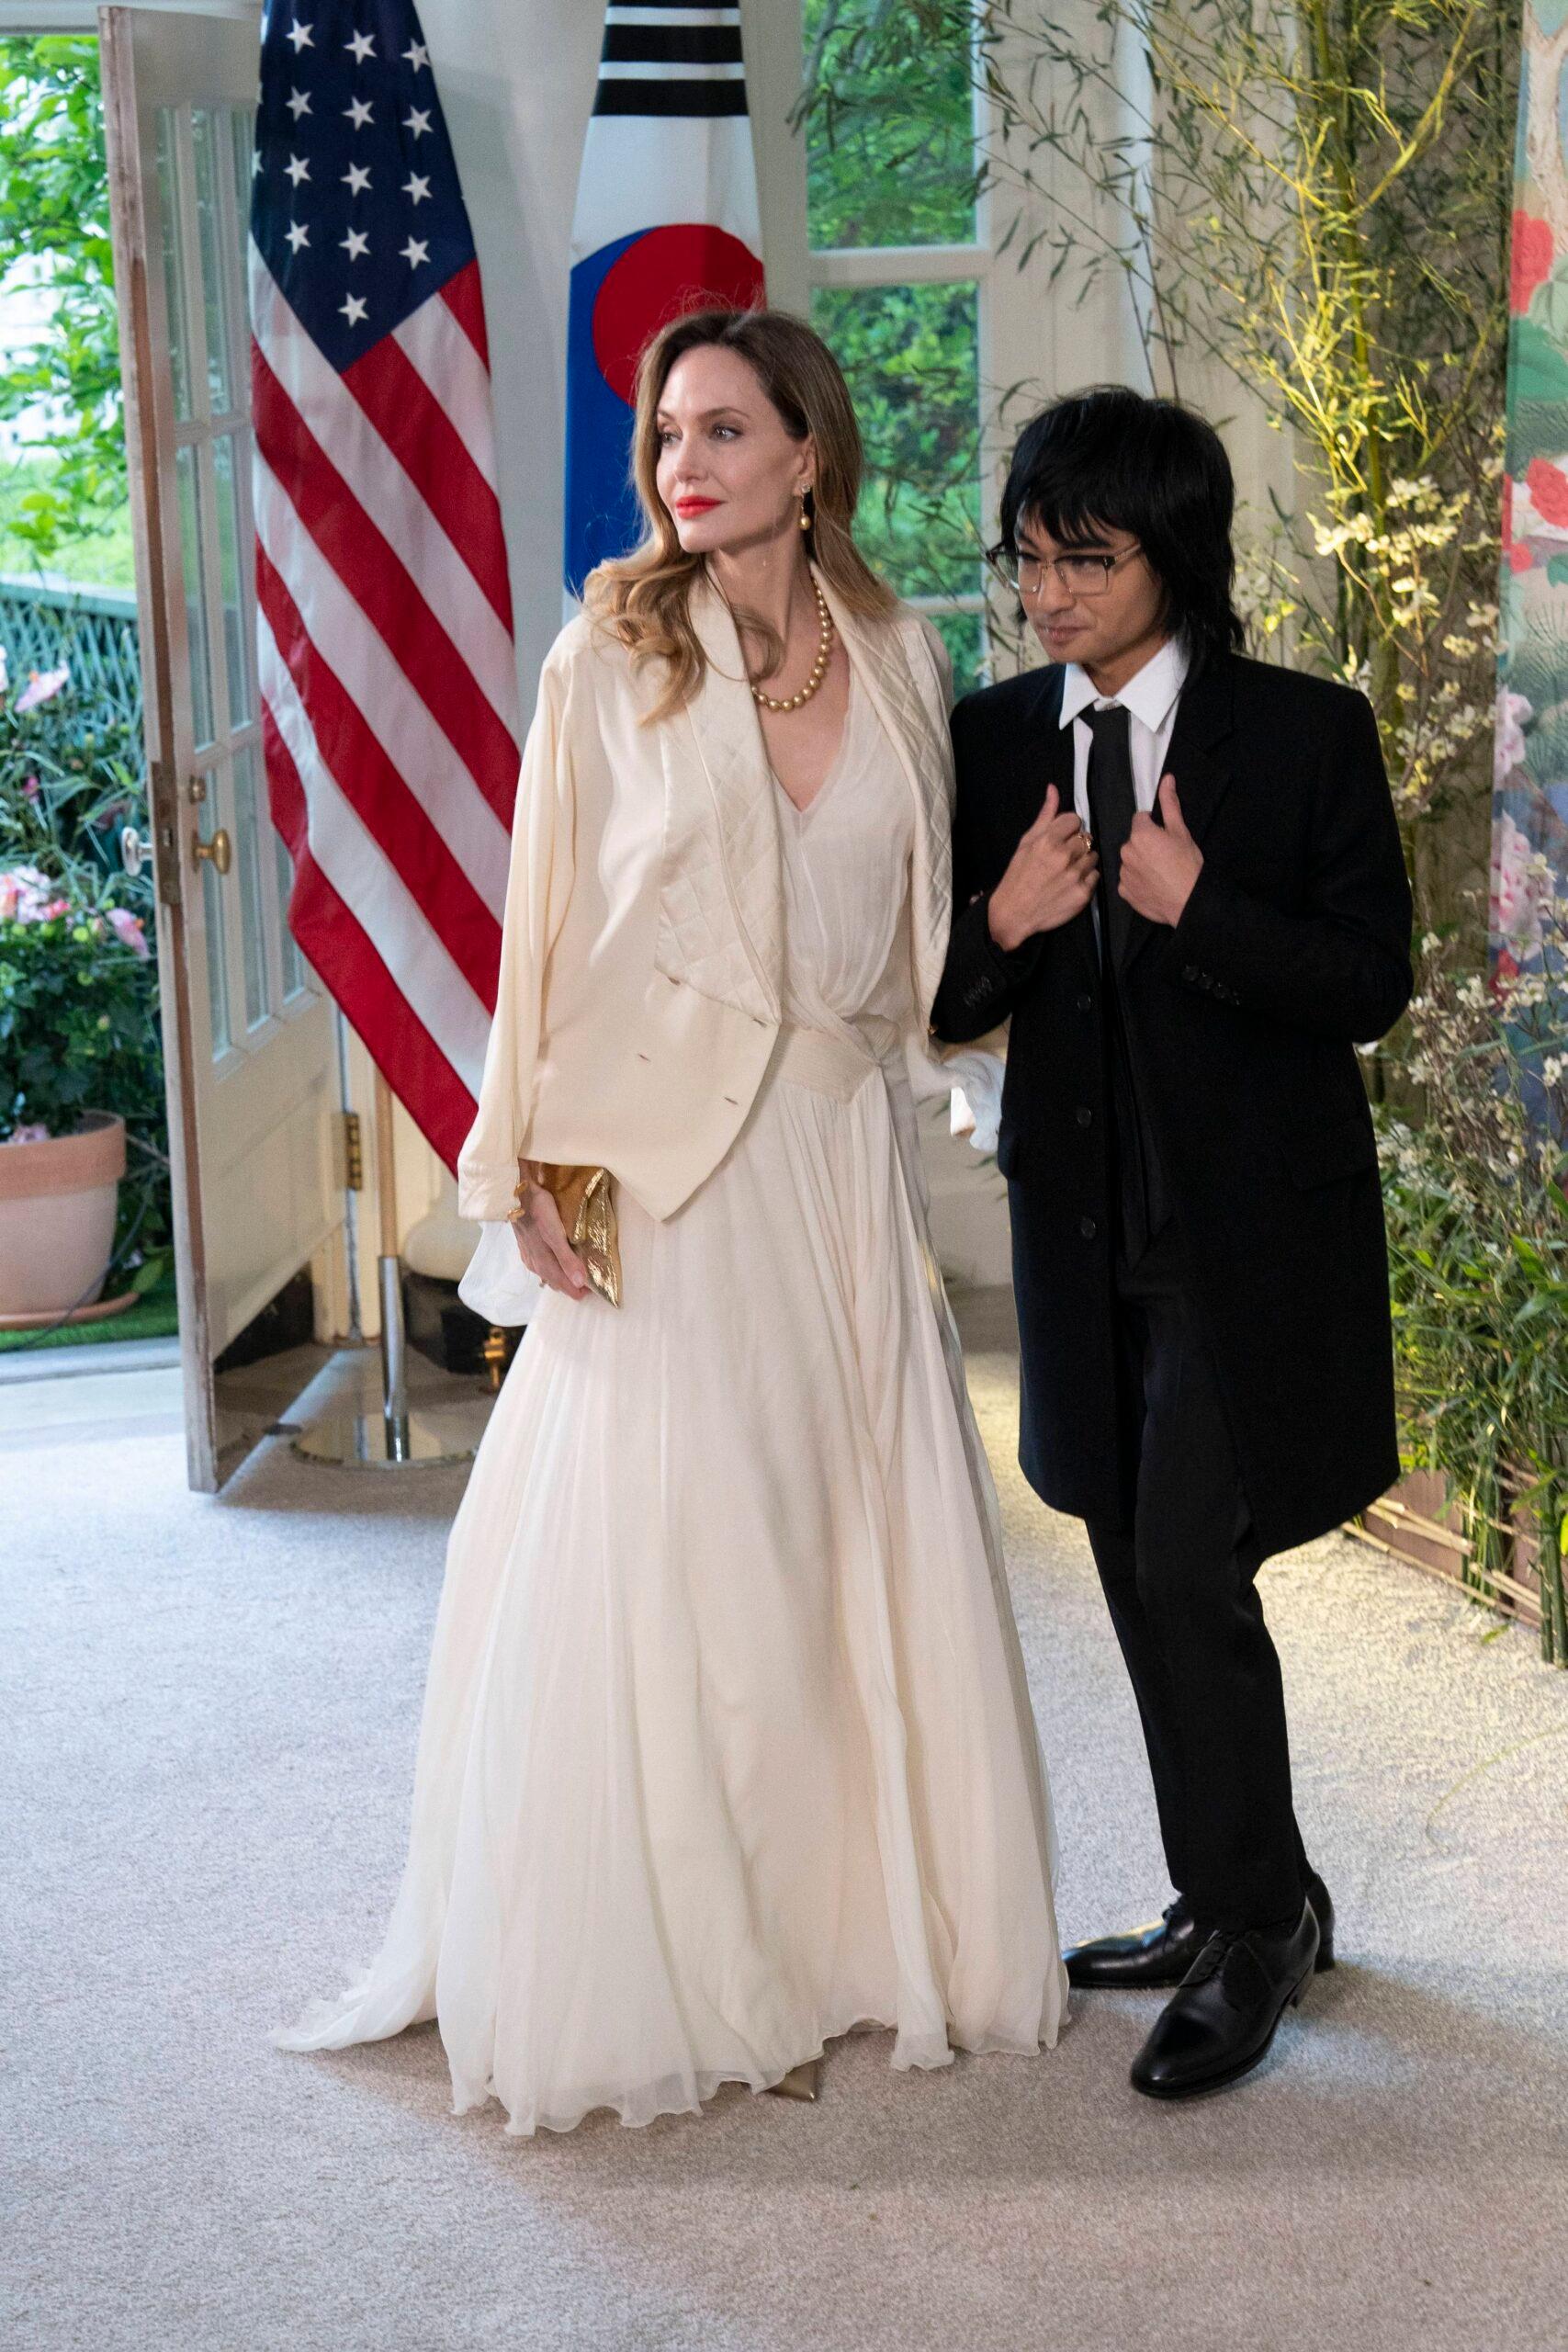 Proud Mama Angelina Jolie Attends White House Soirée With Son, Maddox